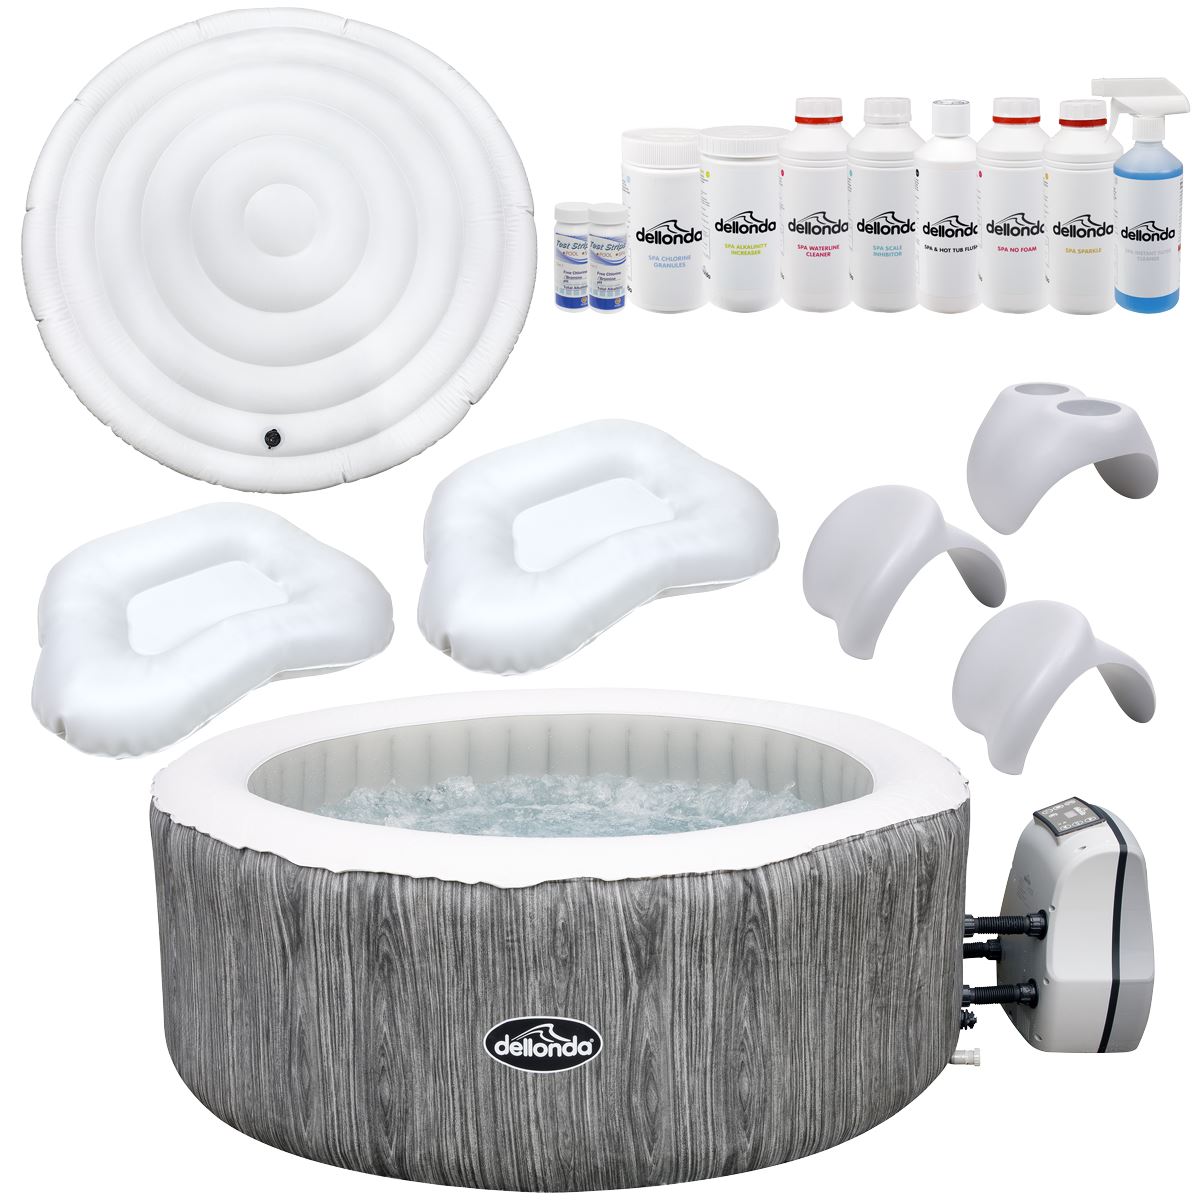 Dellonda 4-6 Person Inflatable Hot Tub Spa Deluxe Kit with Smart Pump - Wood Effect